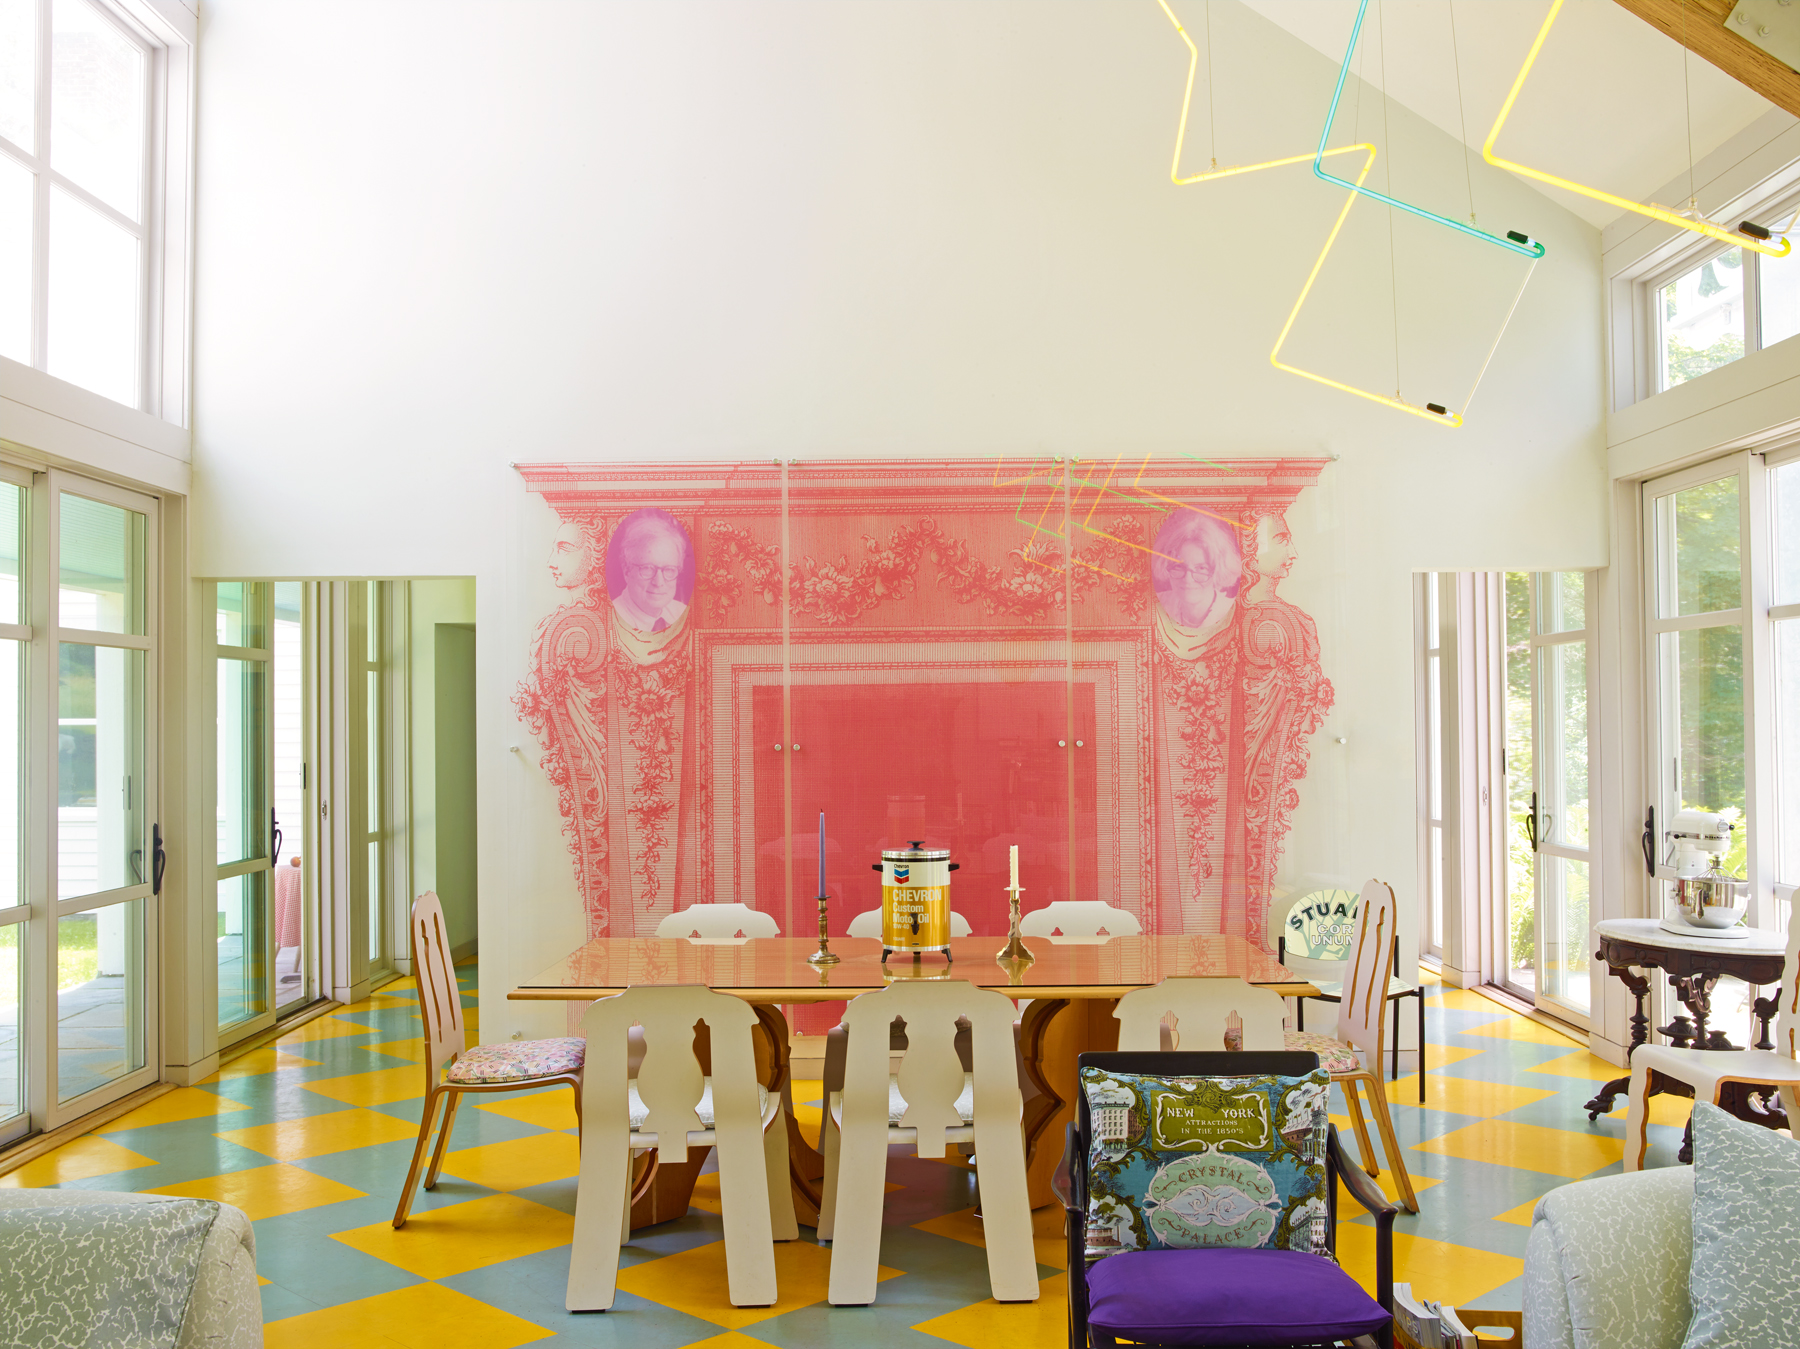 Dining area designed by artist Cary Leibowitz and creative director Simon Lince, featuring colorful furniture and decorations